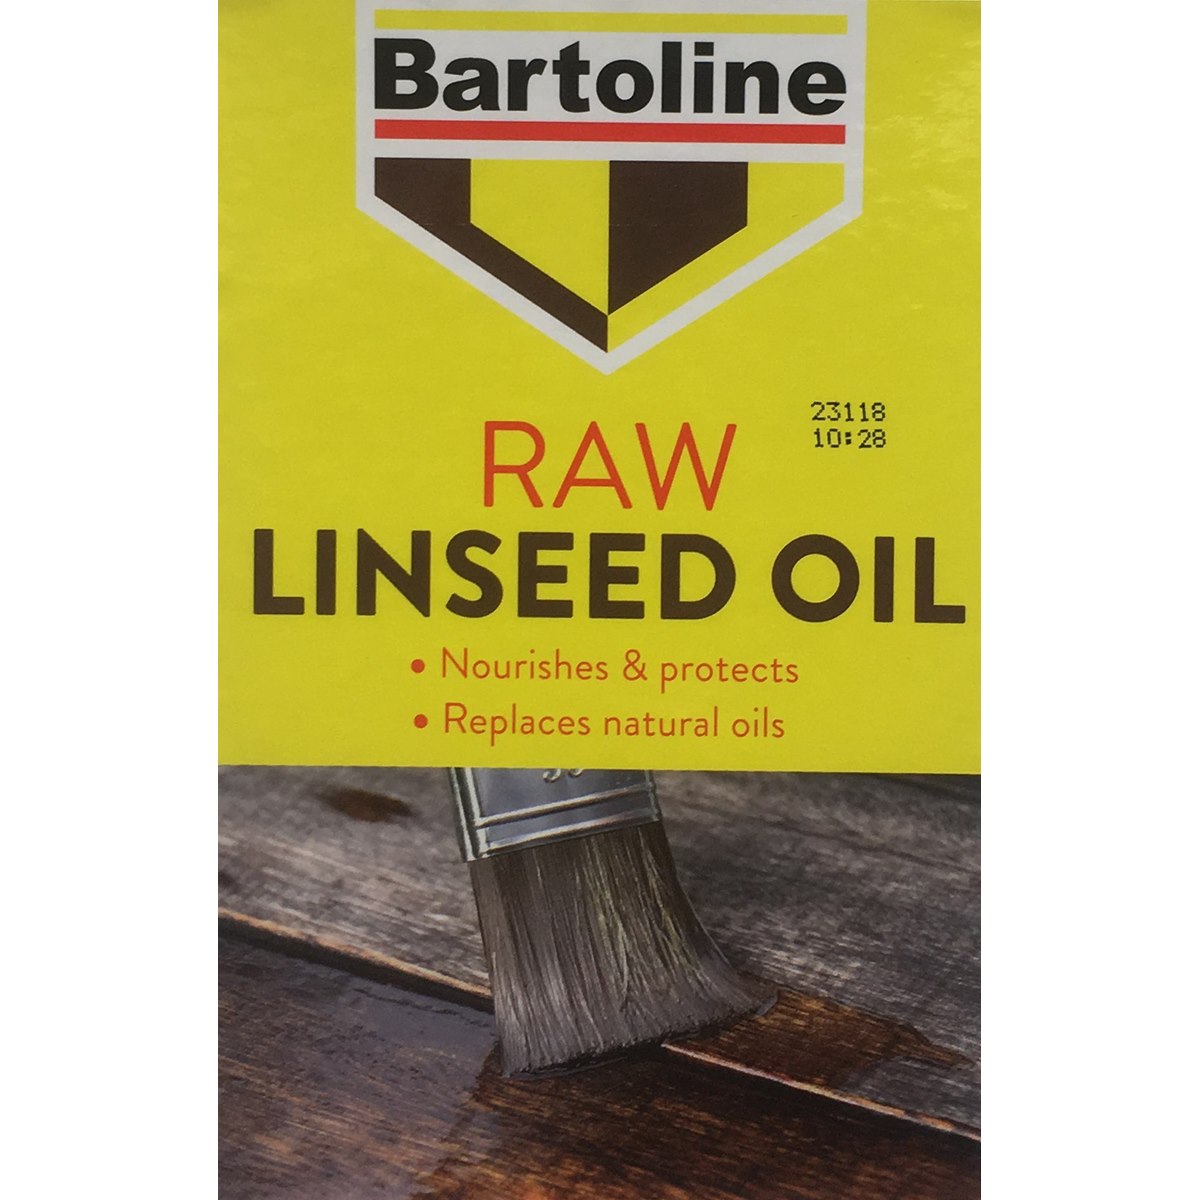 Where to Buy Raw Linseed Oil